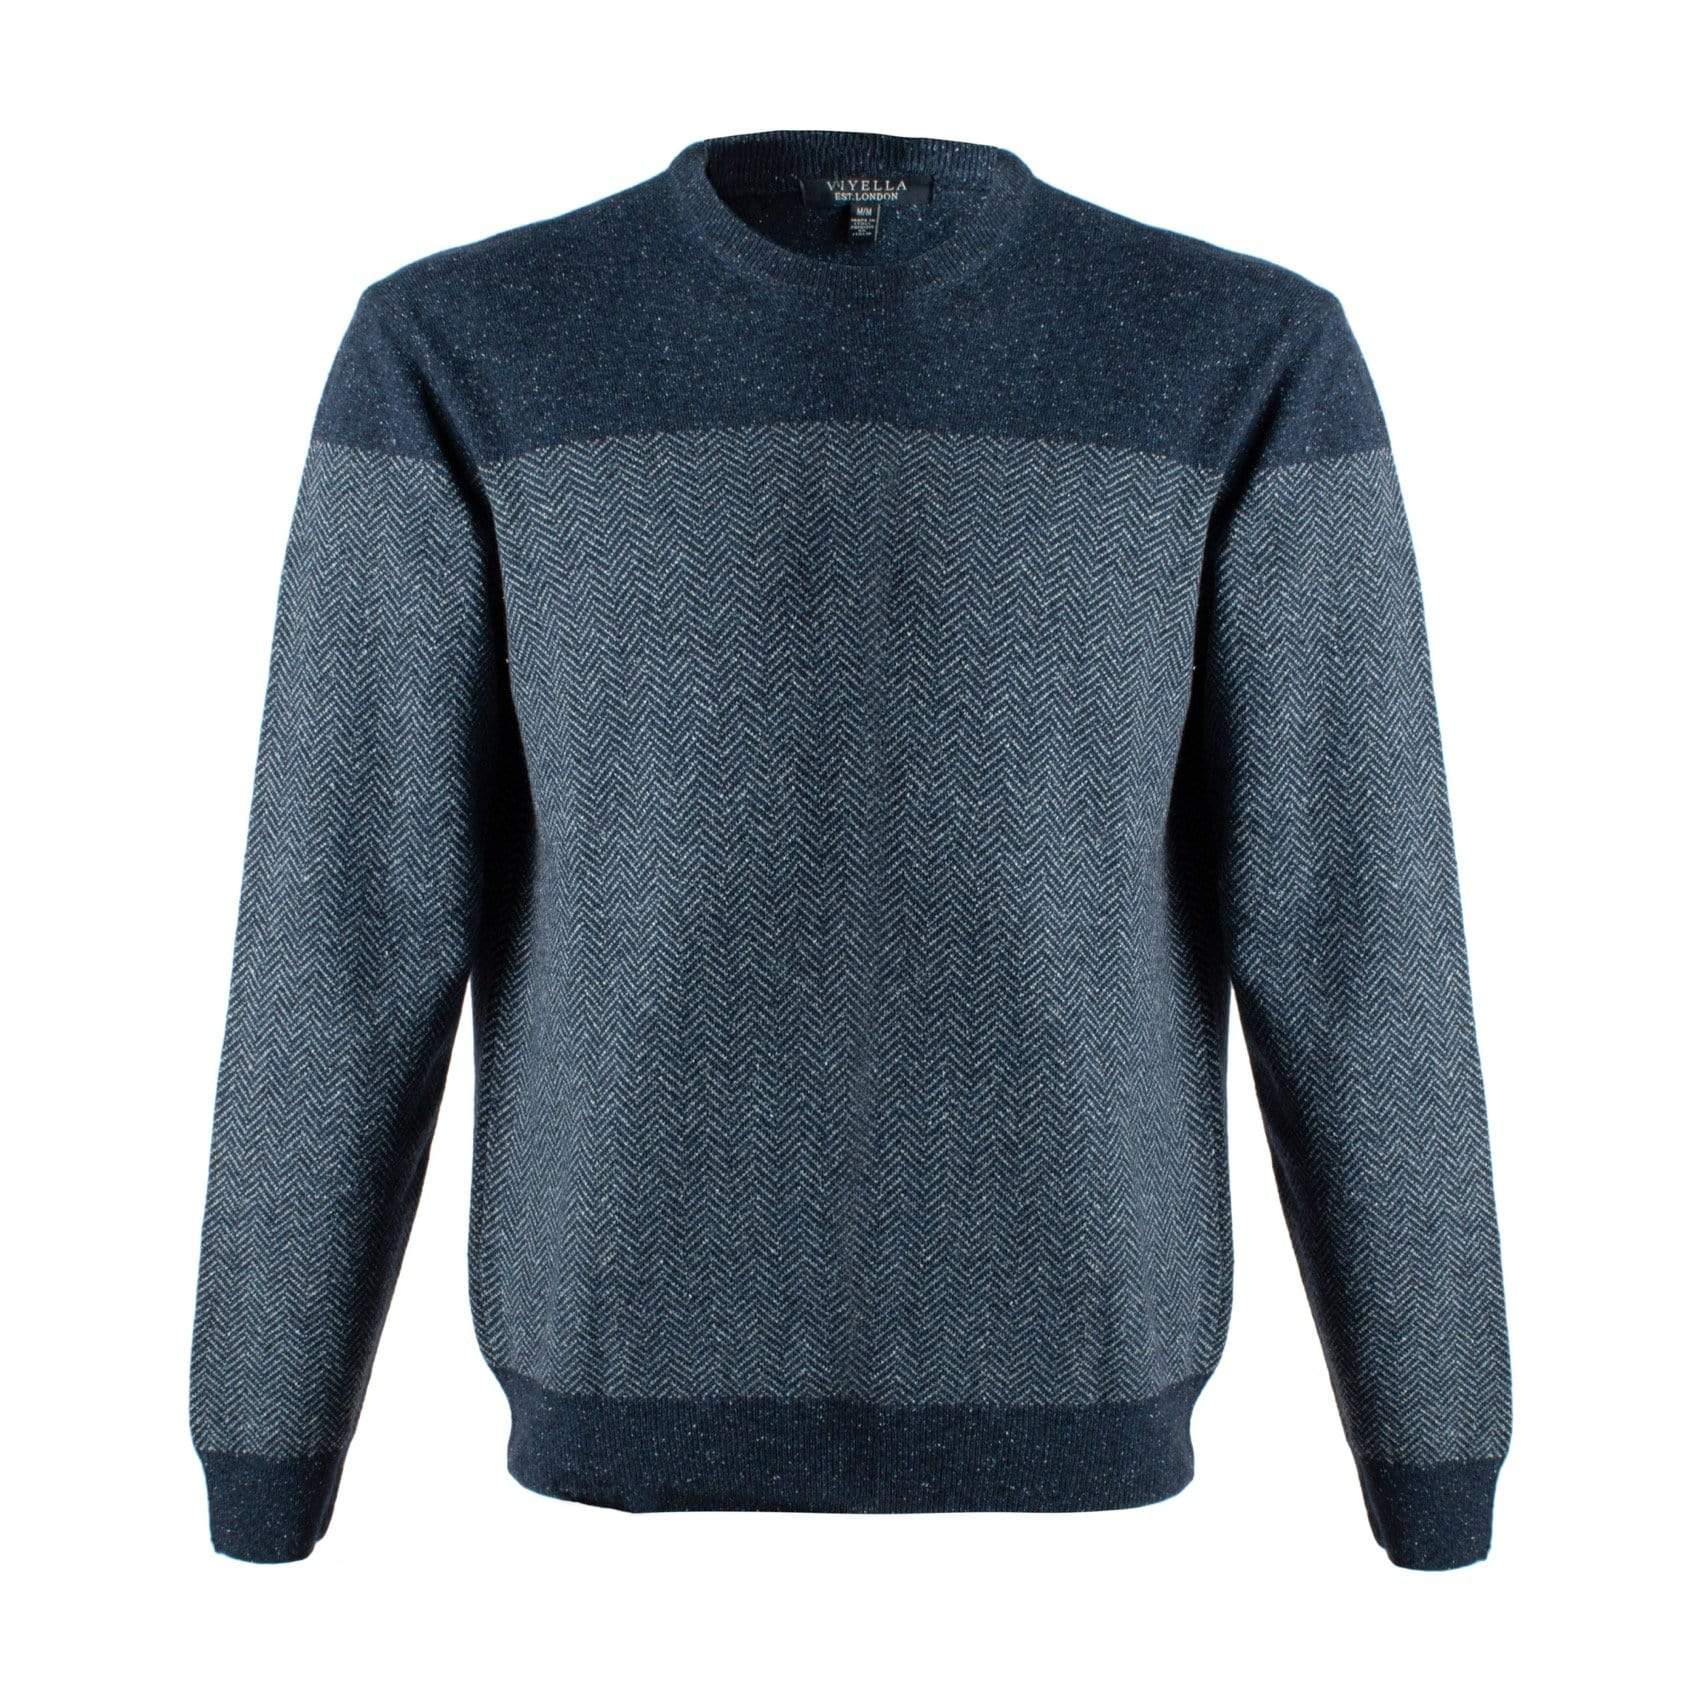 Viyella Discover Classic Style of these Blue 100% Cotton Tonal Herringbone Crewneck: Crafted with Excellence in Italy